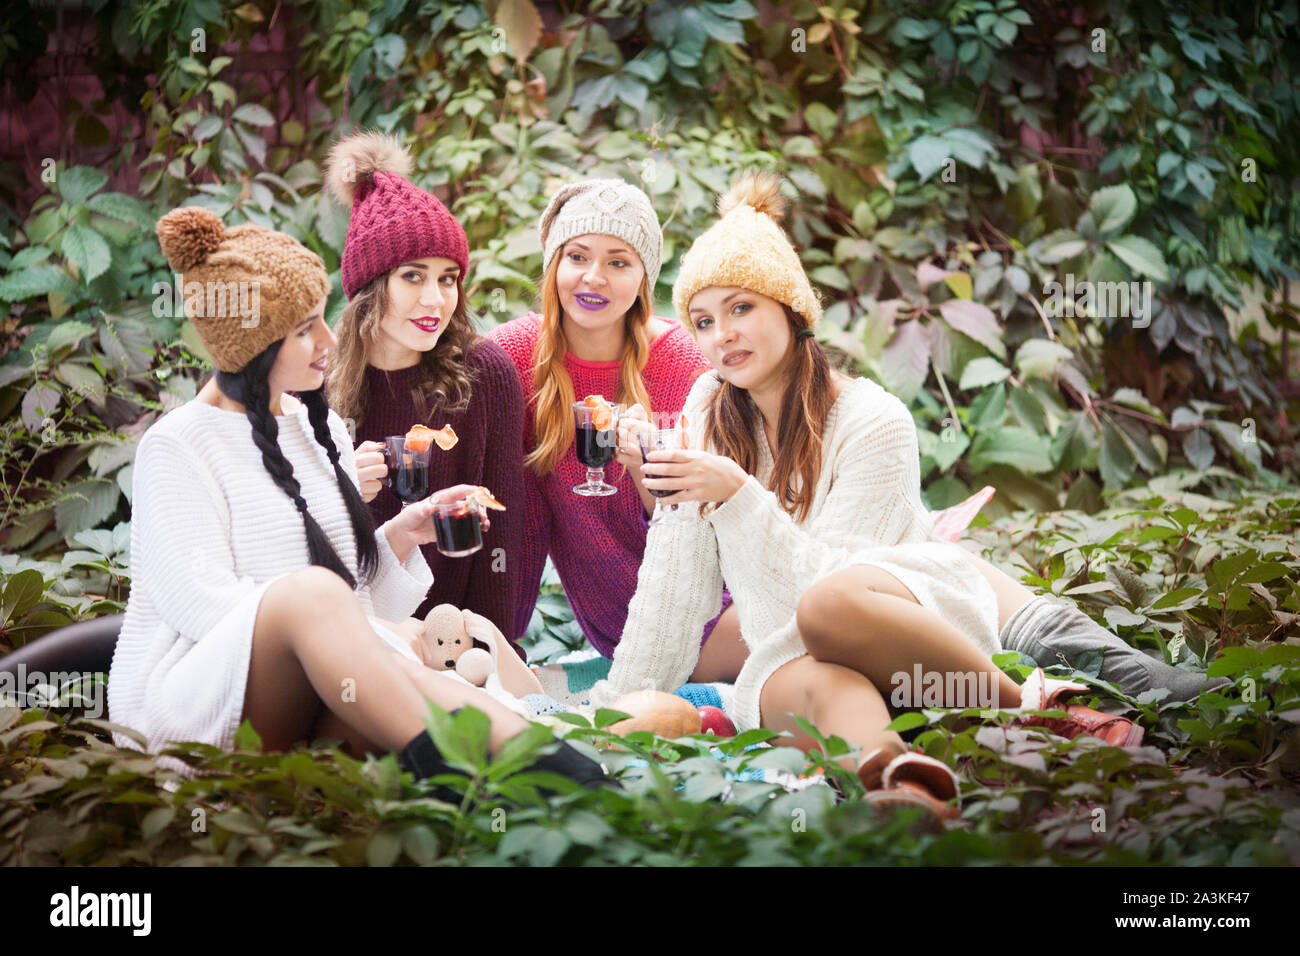 Young women drink mulled wine in autumn park. Sunny autumn day. Outdoors lifestyle fashion portrait. Positive emotions. Stock Photo